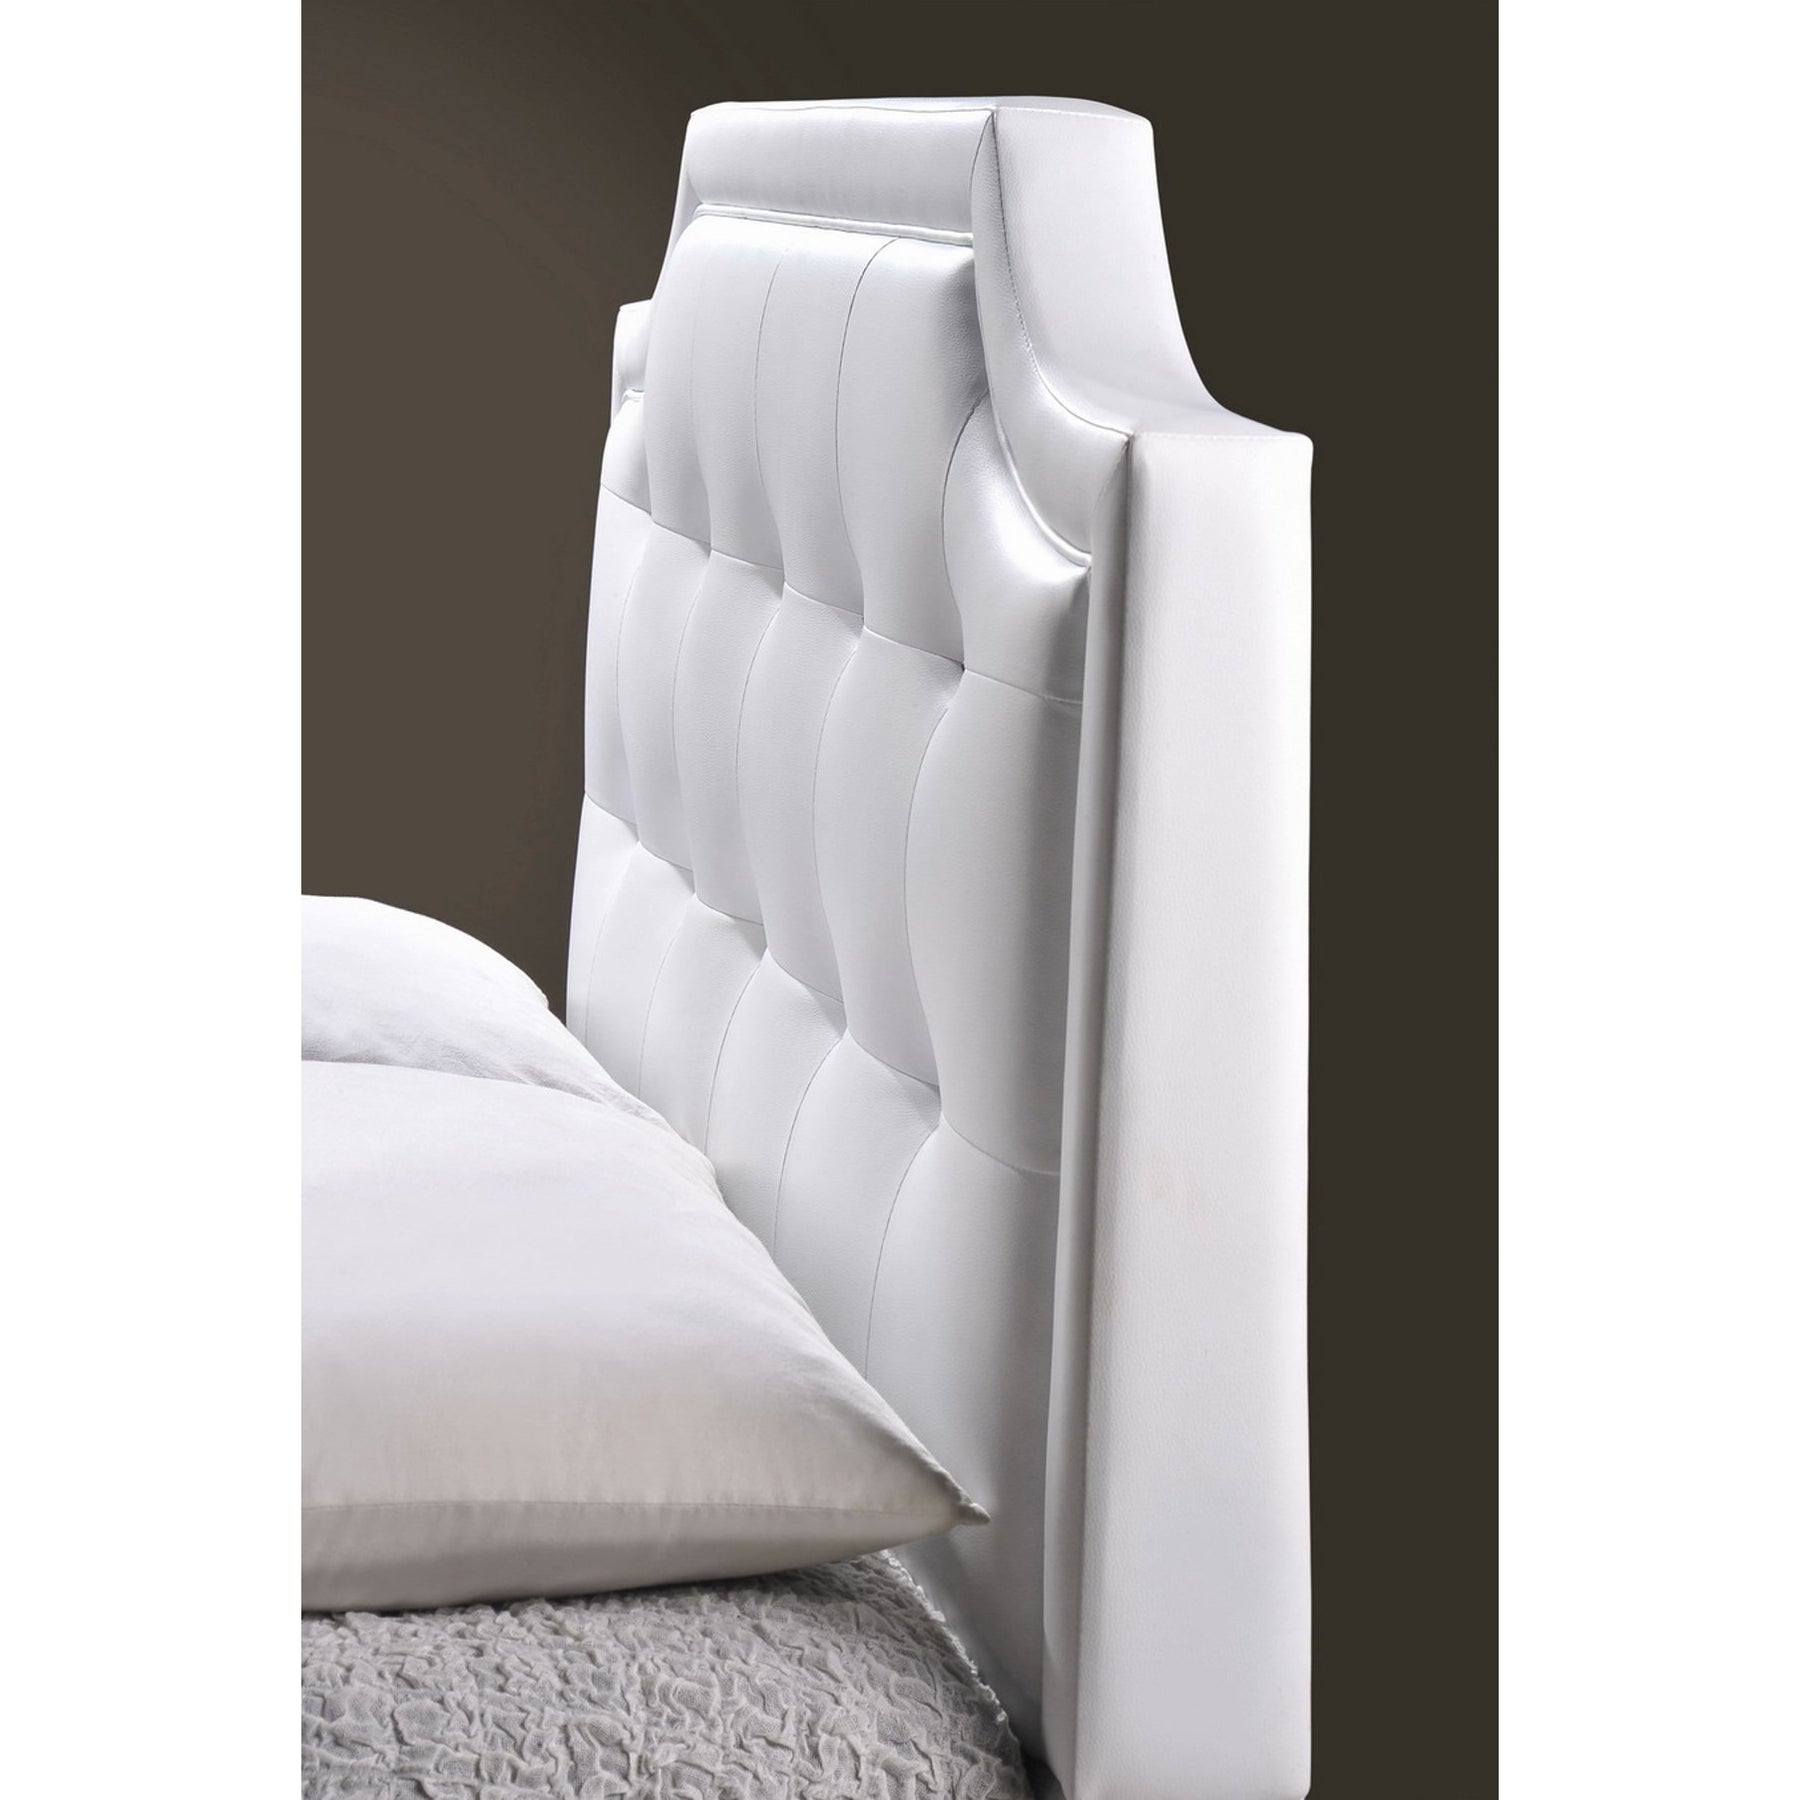 Baxton Studio Carlotta White Modern Bed with Upholstered Headboard - Queen Size Baxton Studio-beds-Minimal And Modern - 5